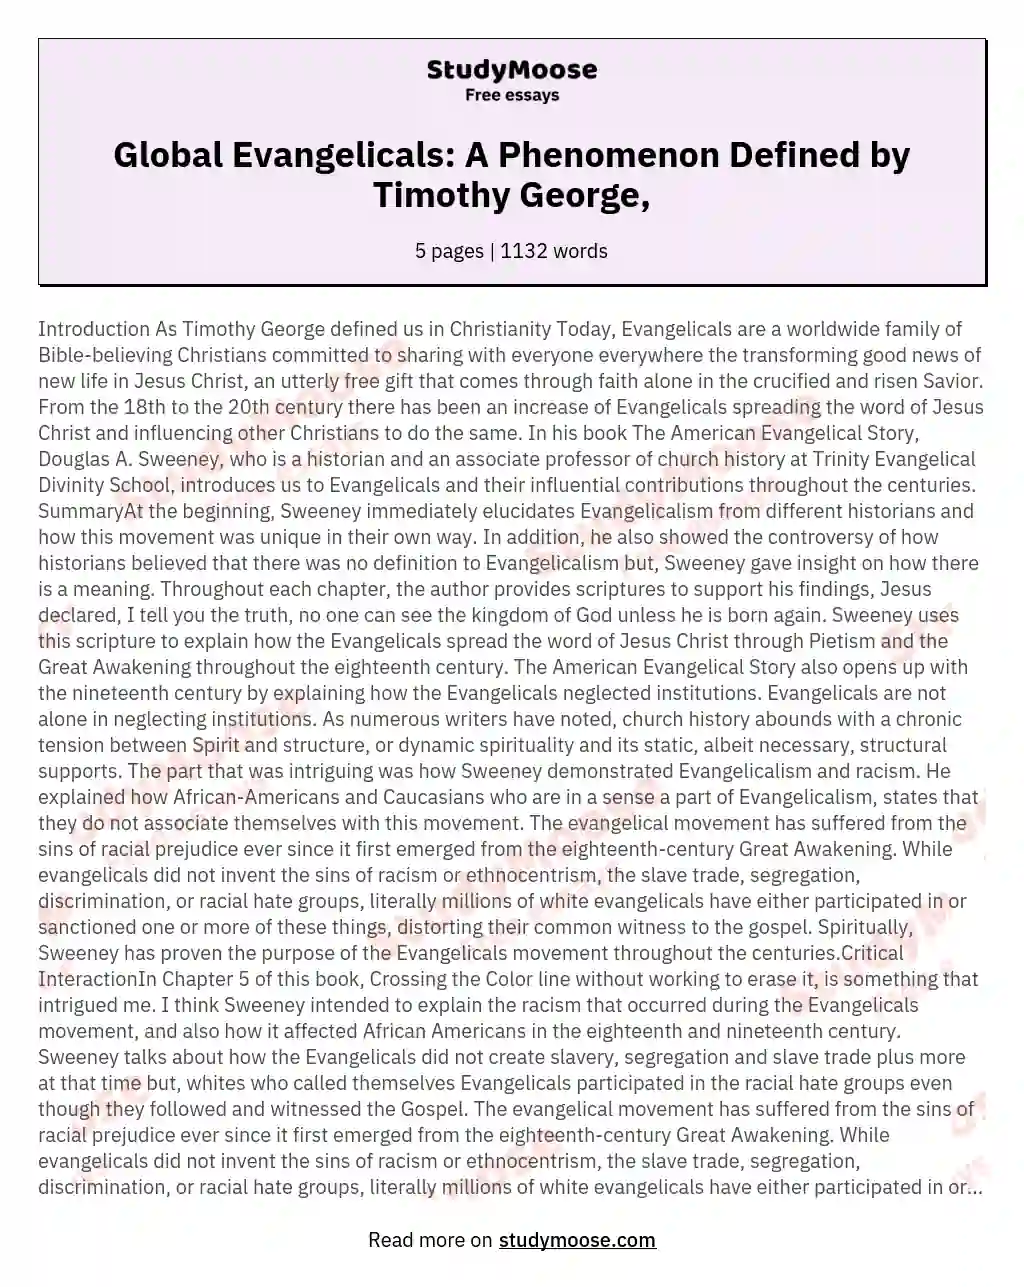 Global Evangelicals: A Phenomenon Defined by Timothy George, essay